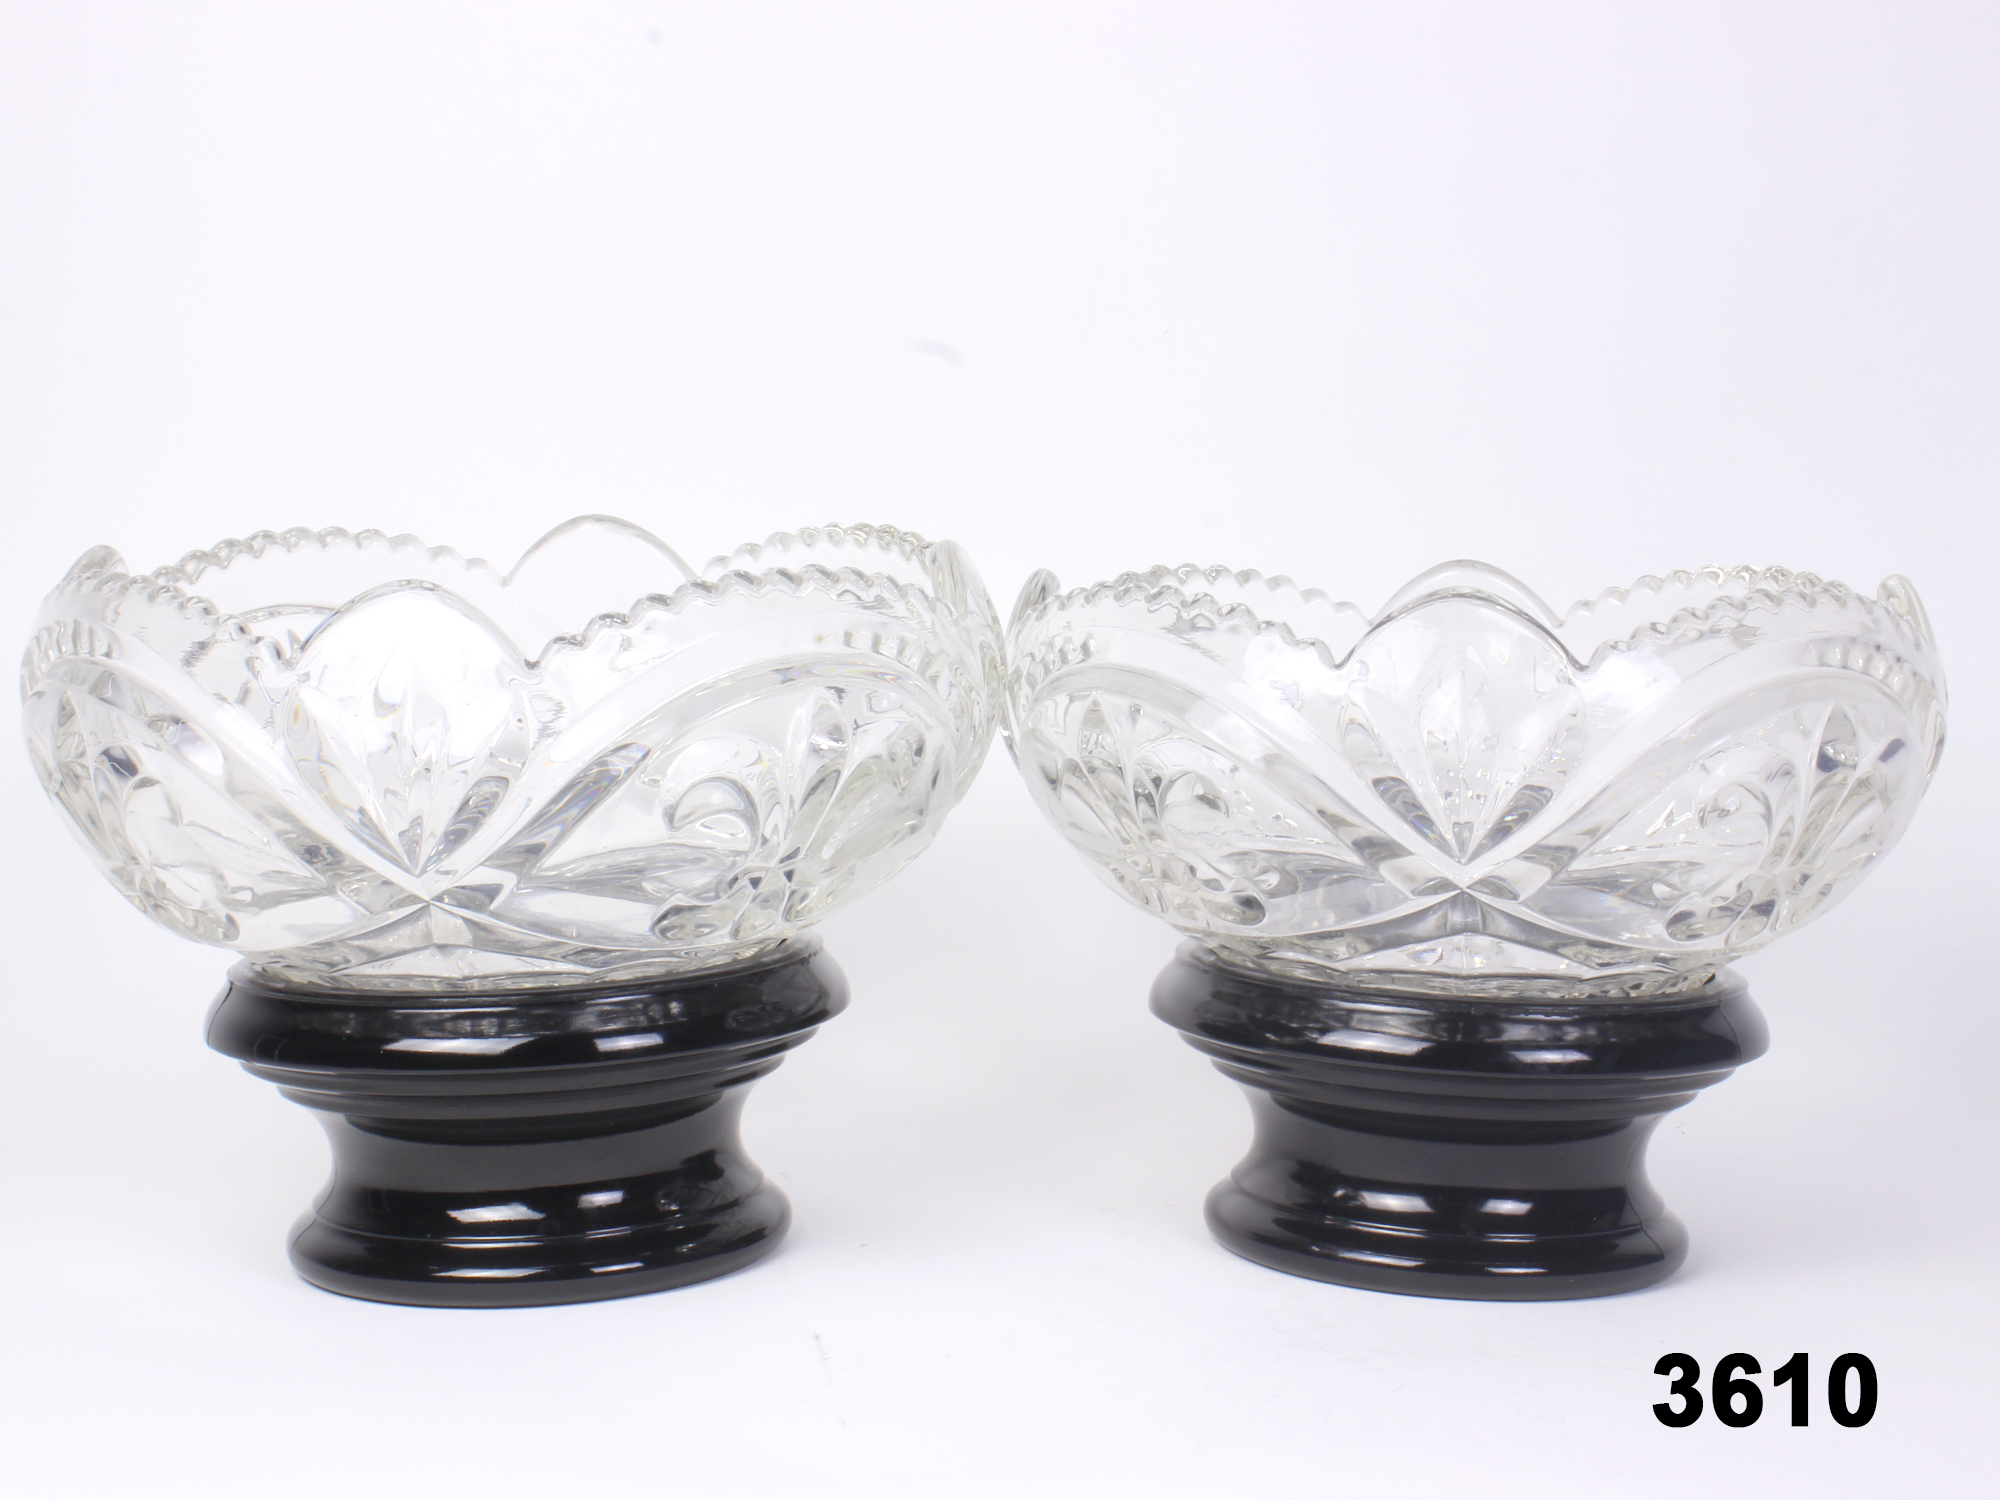 2 Glass Bowls On Glass Stands